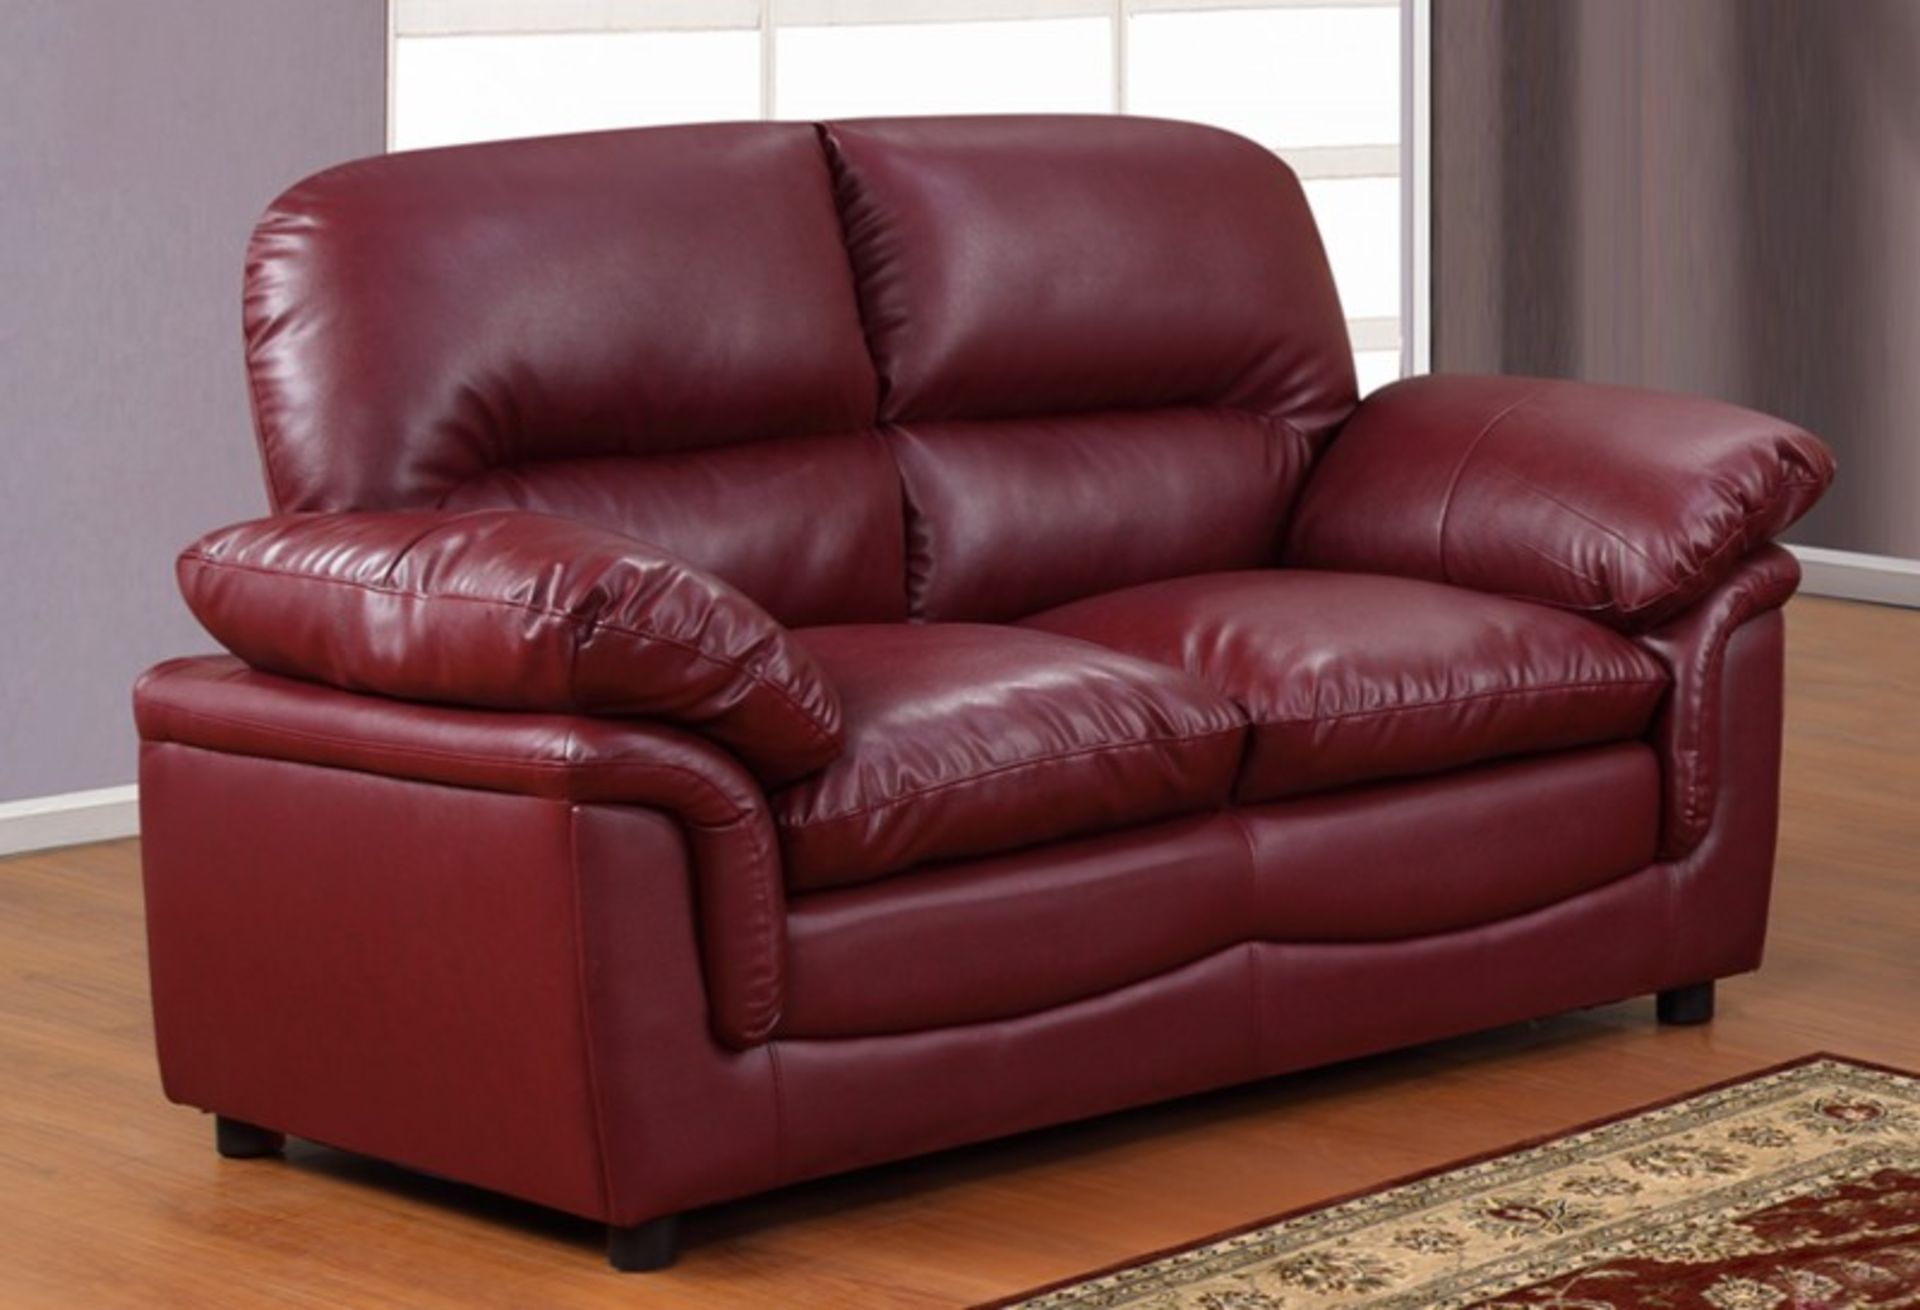 veronica 2 seater sofa in rich burgandy leather plus 2 seater veronica sofa in rich burgandy leather